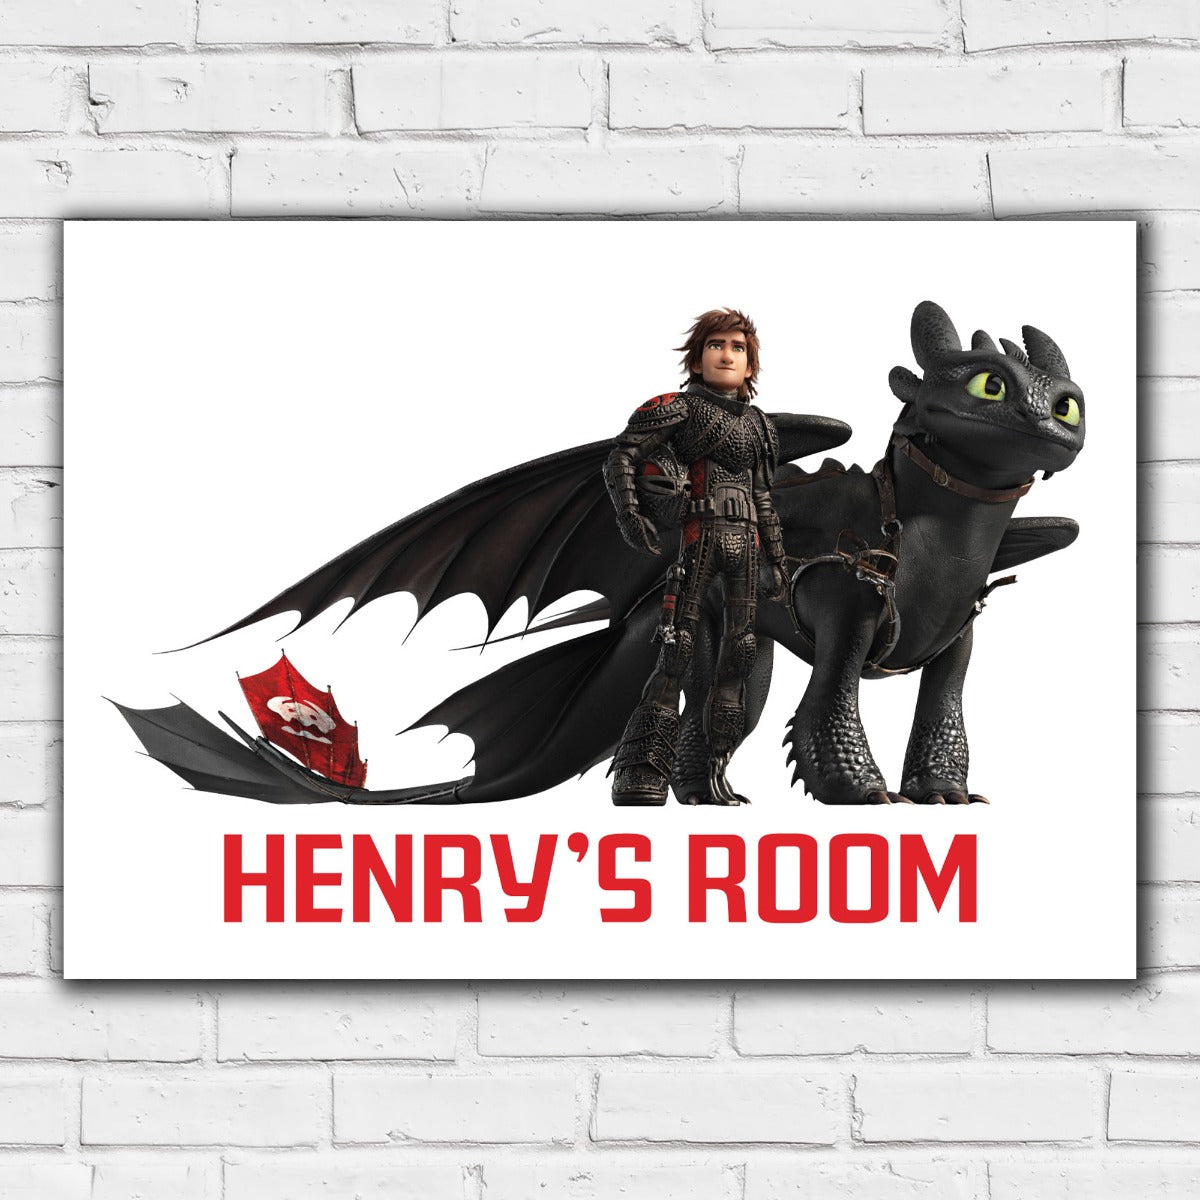 How To Train Your Dragon Print - Hiccup and Toothless Standing Print